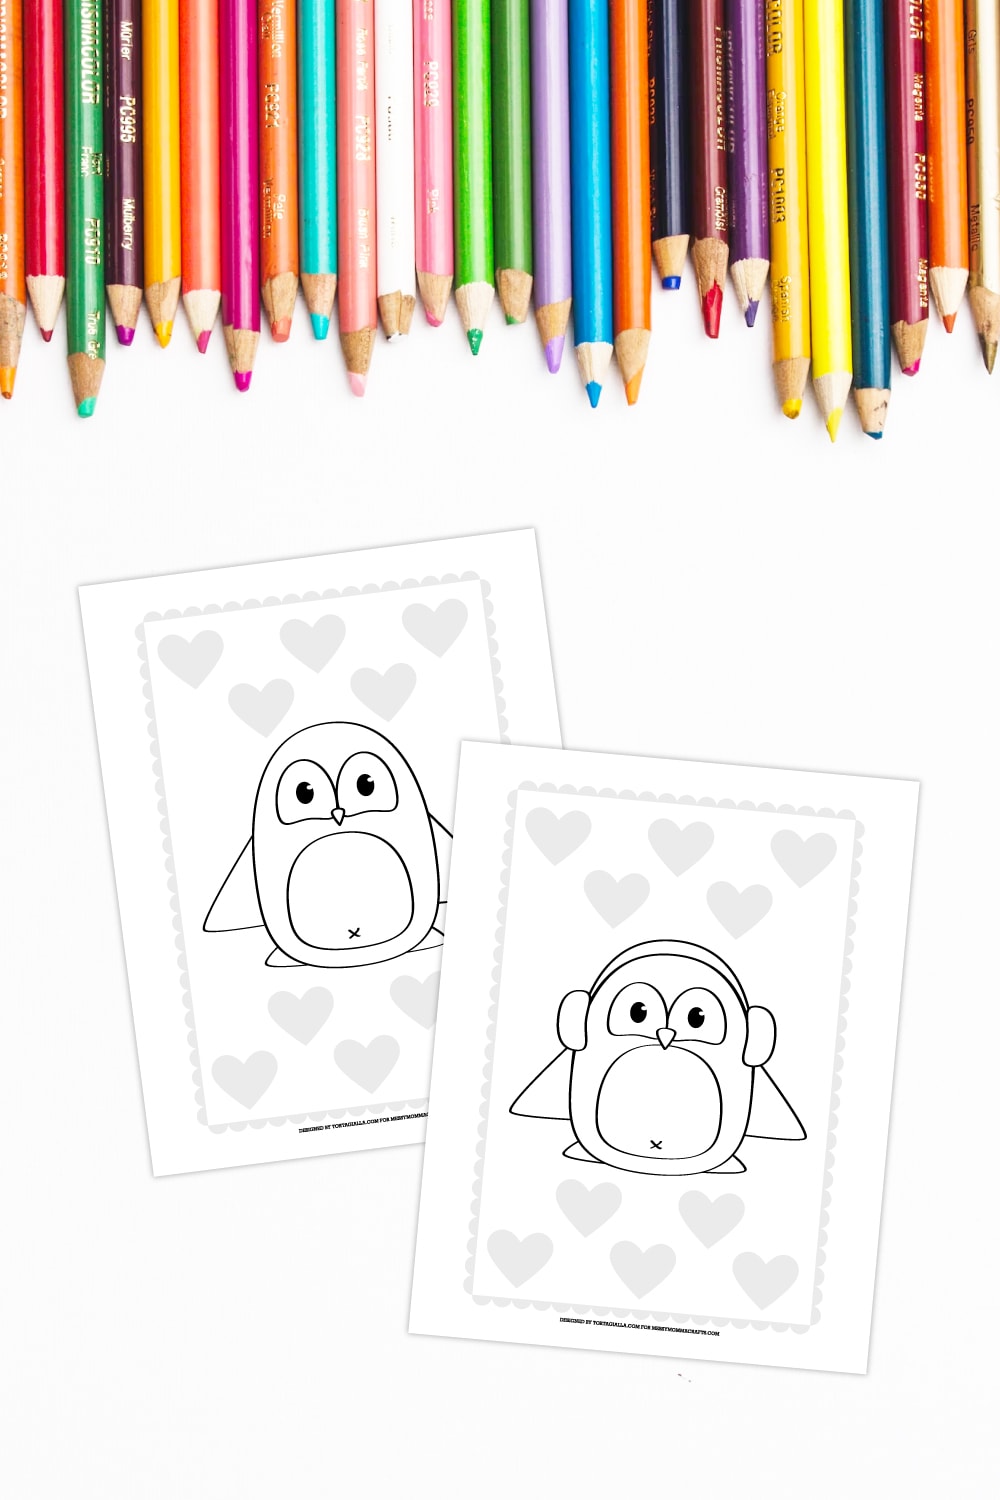 Preview of two penguin coloring pages for kids on white background with row of colored pencils on the top border.